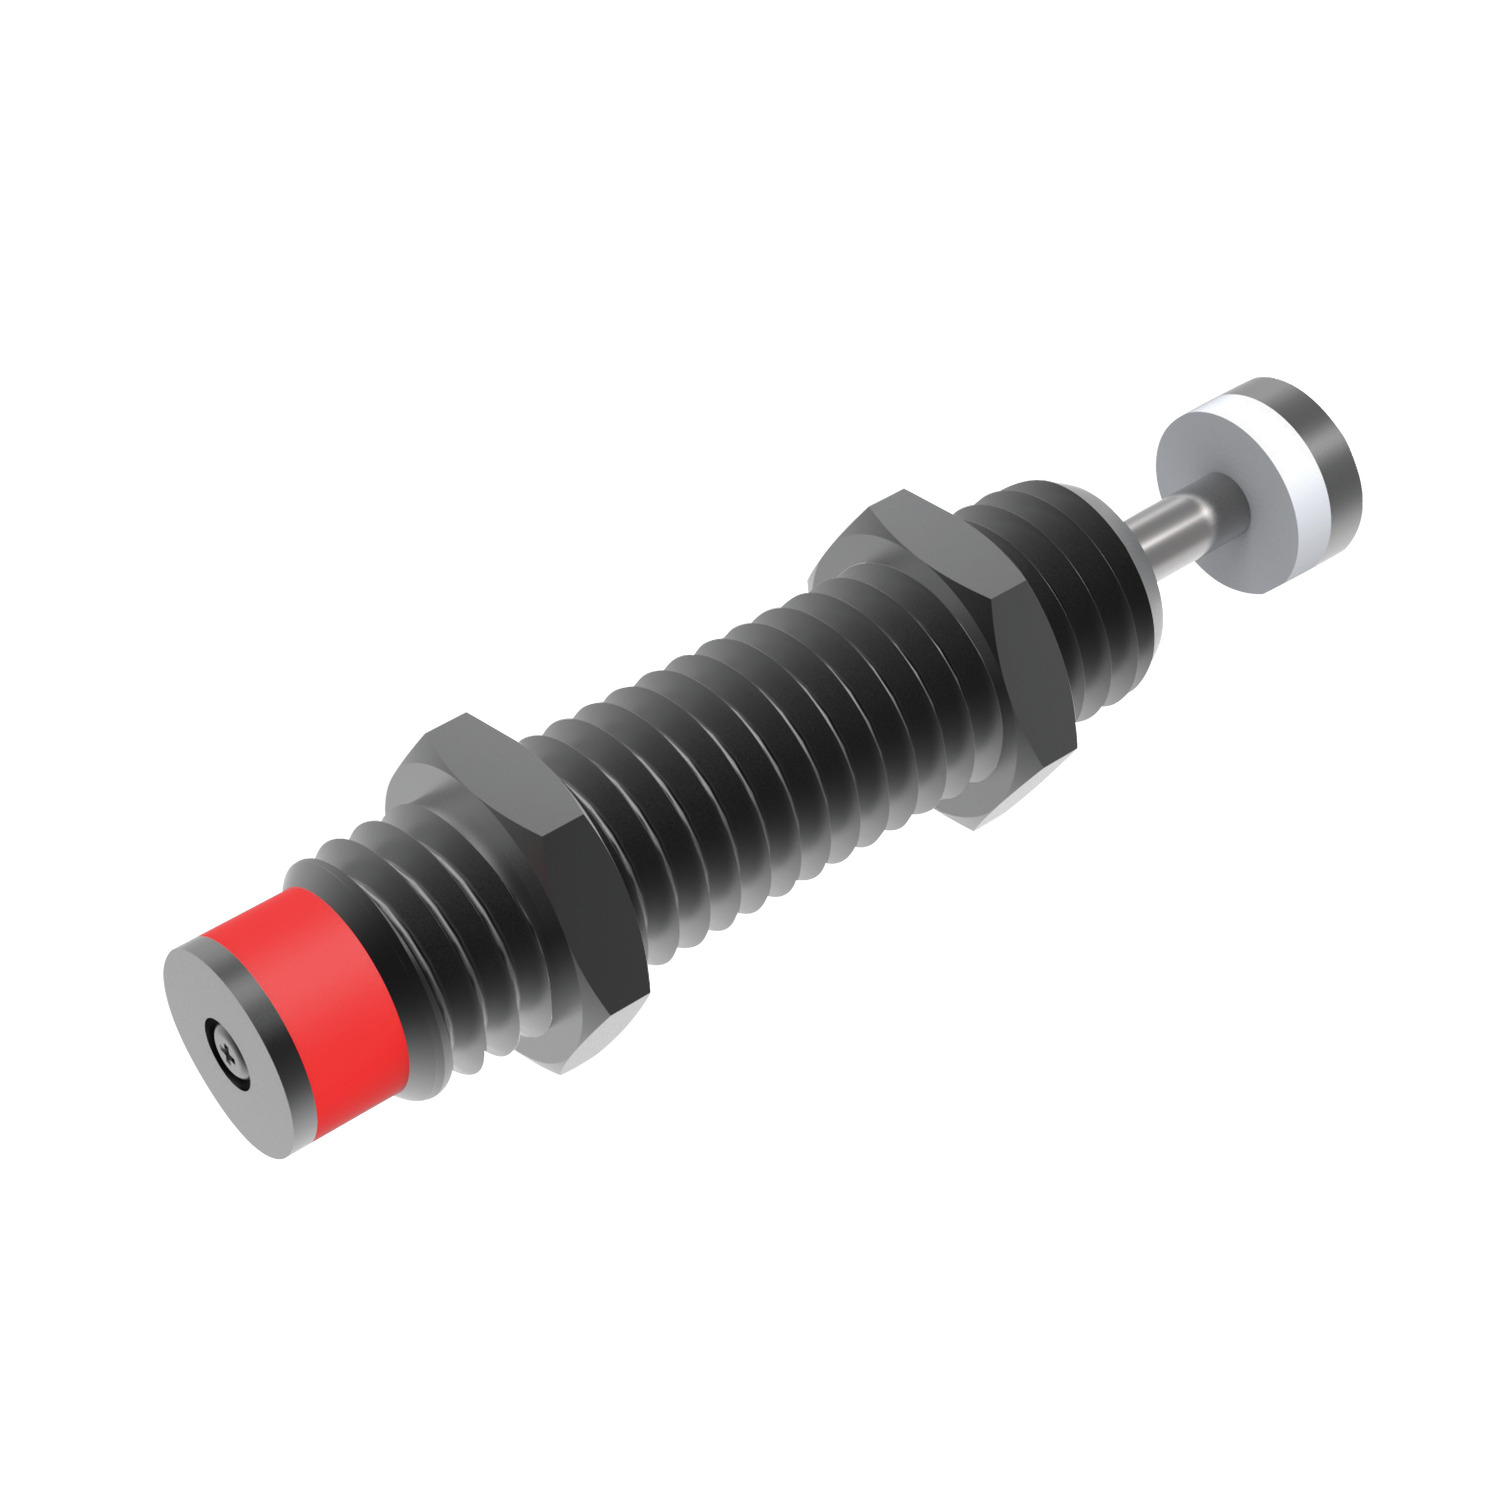 Shock Absorber Self Compensating Self compensating fixed shock absorbers are consistent and reliable dampening force or linear deceleration, throughout entire impact stroke.